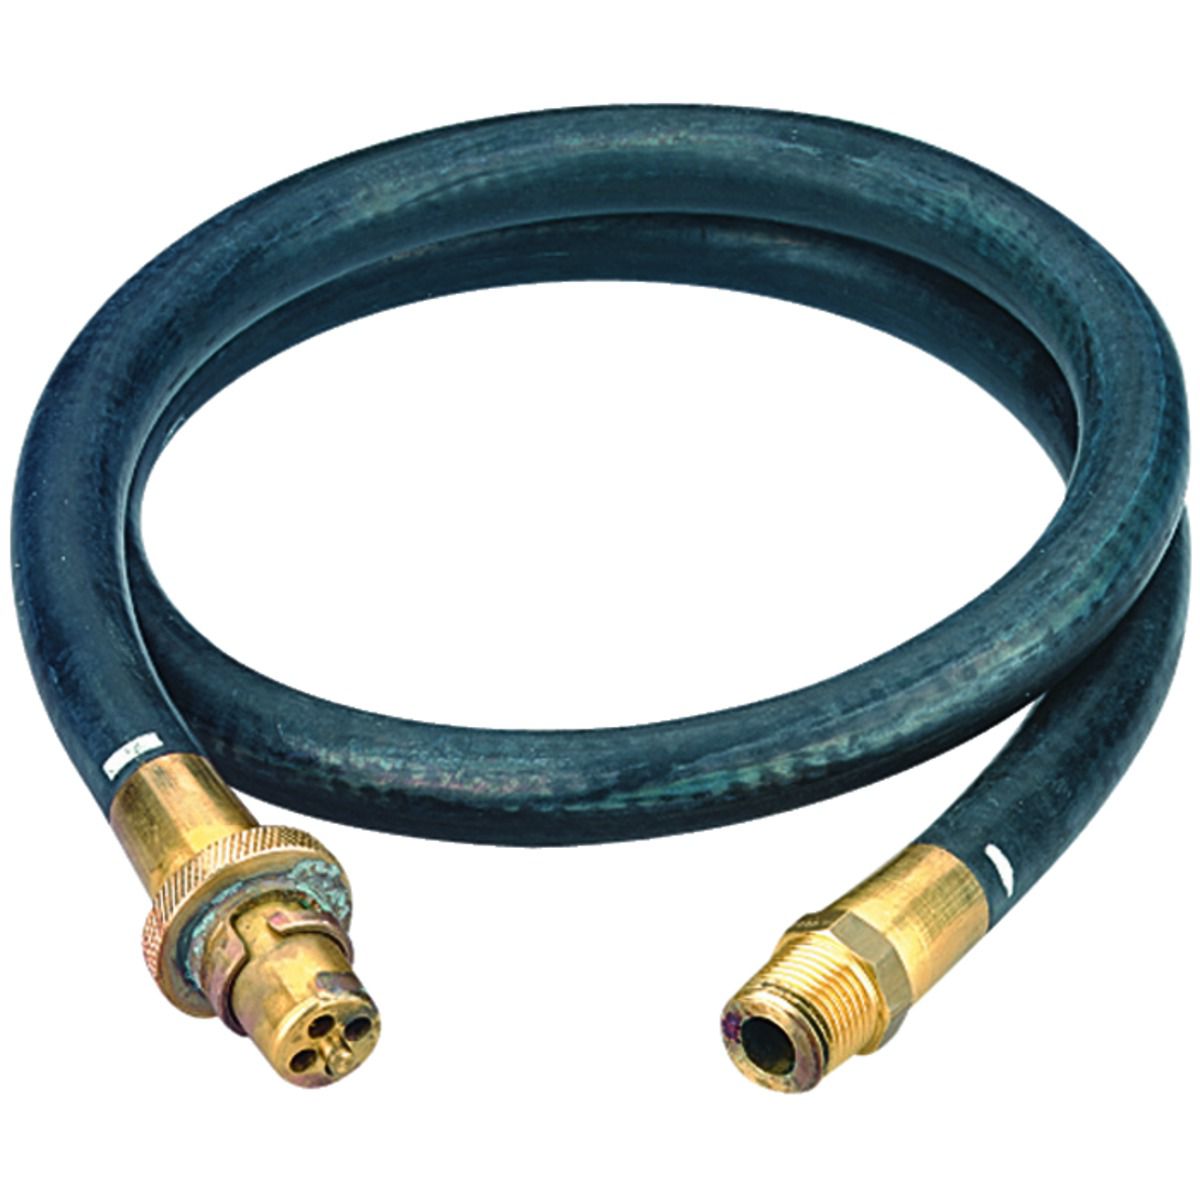 Image of Primaflow Bayonet Hose For Cookers 12mm X 1.21m